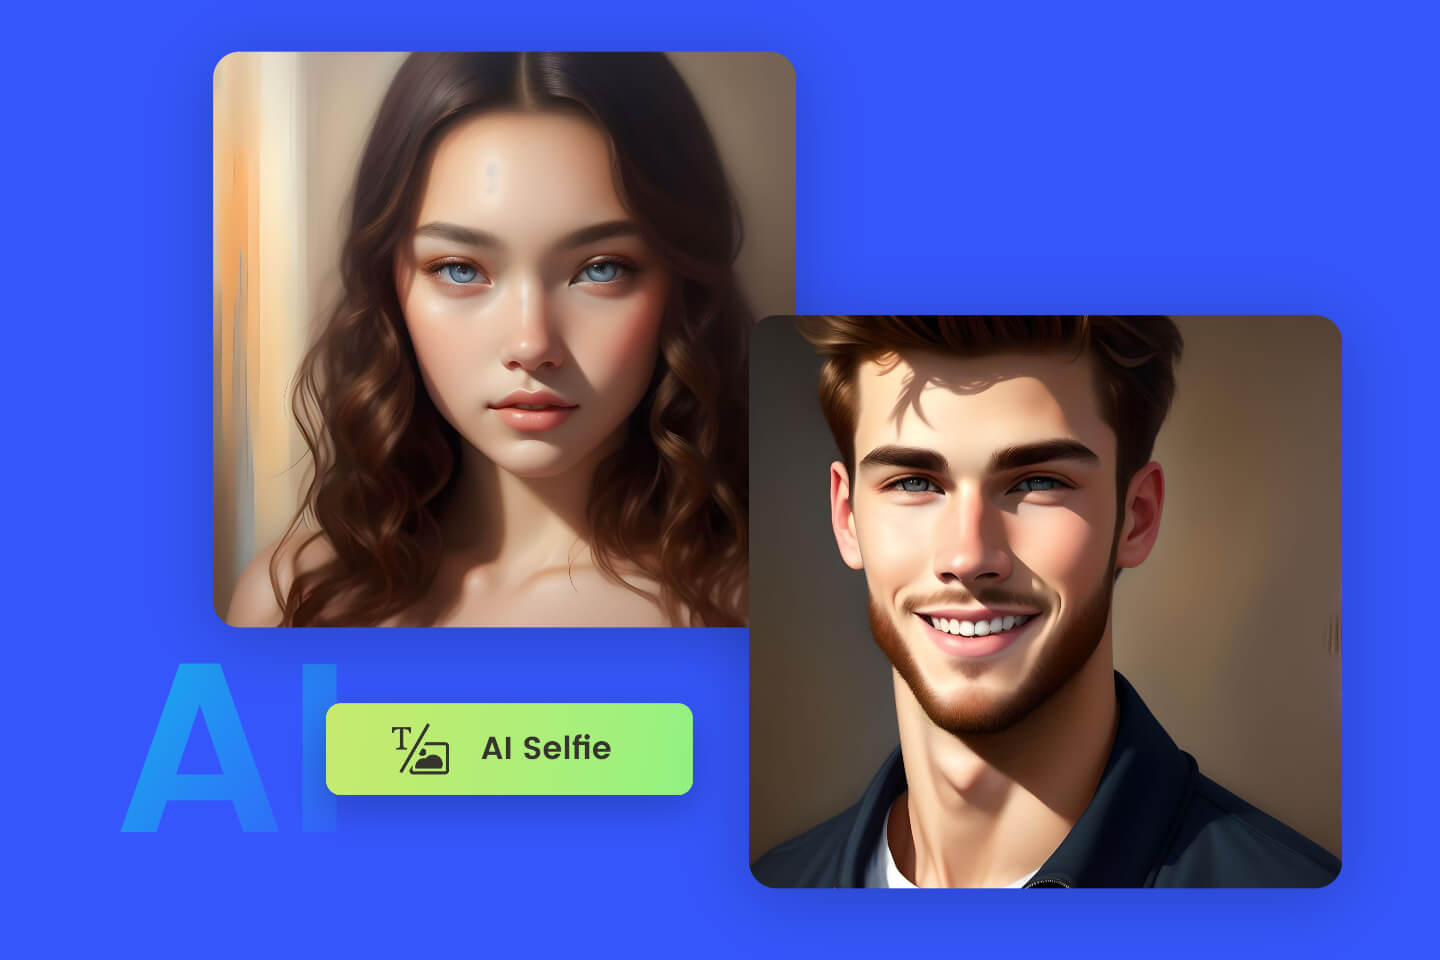 AI generated images of a boy and a girl